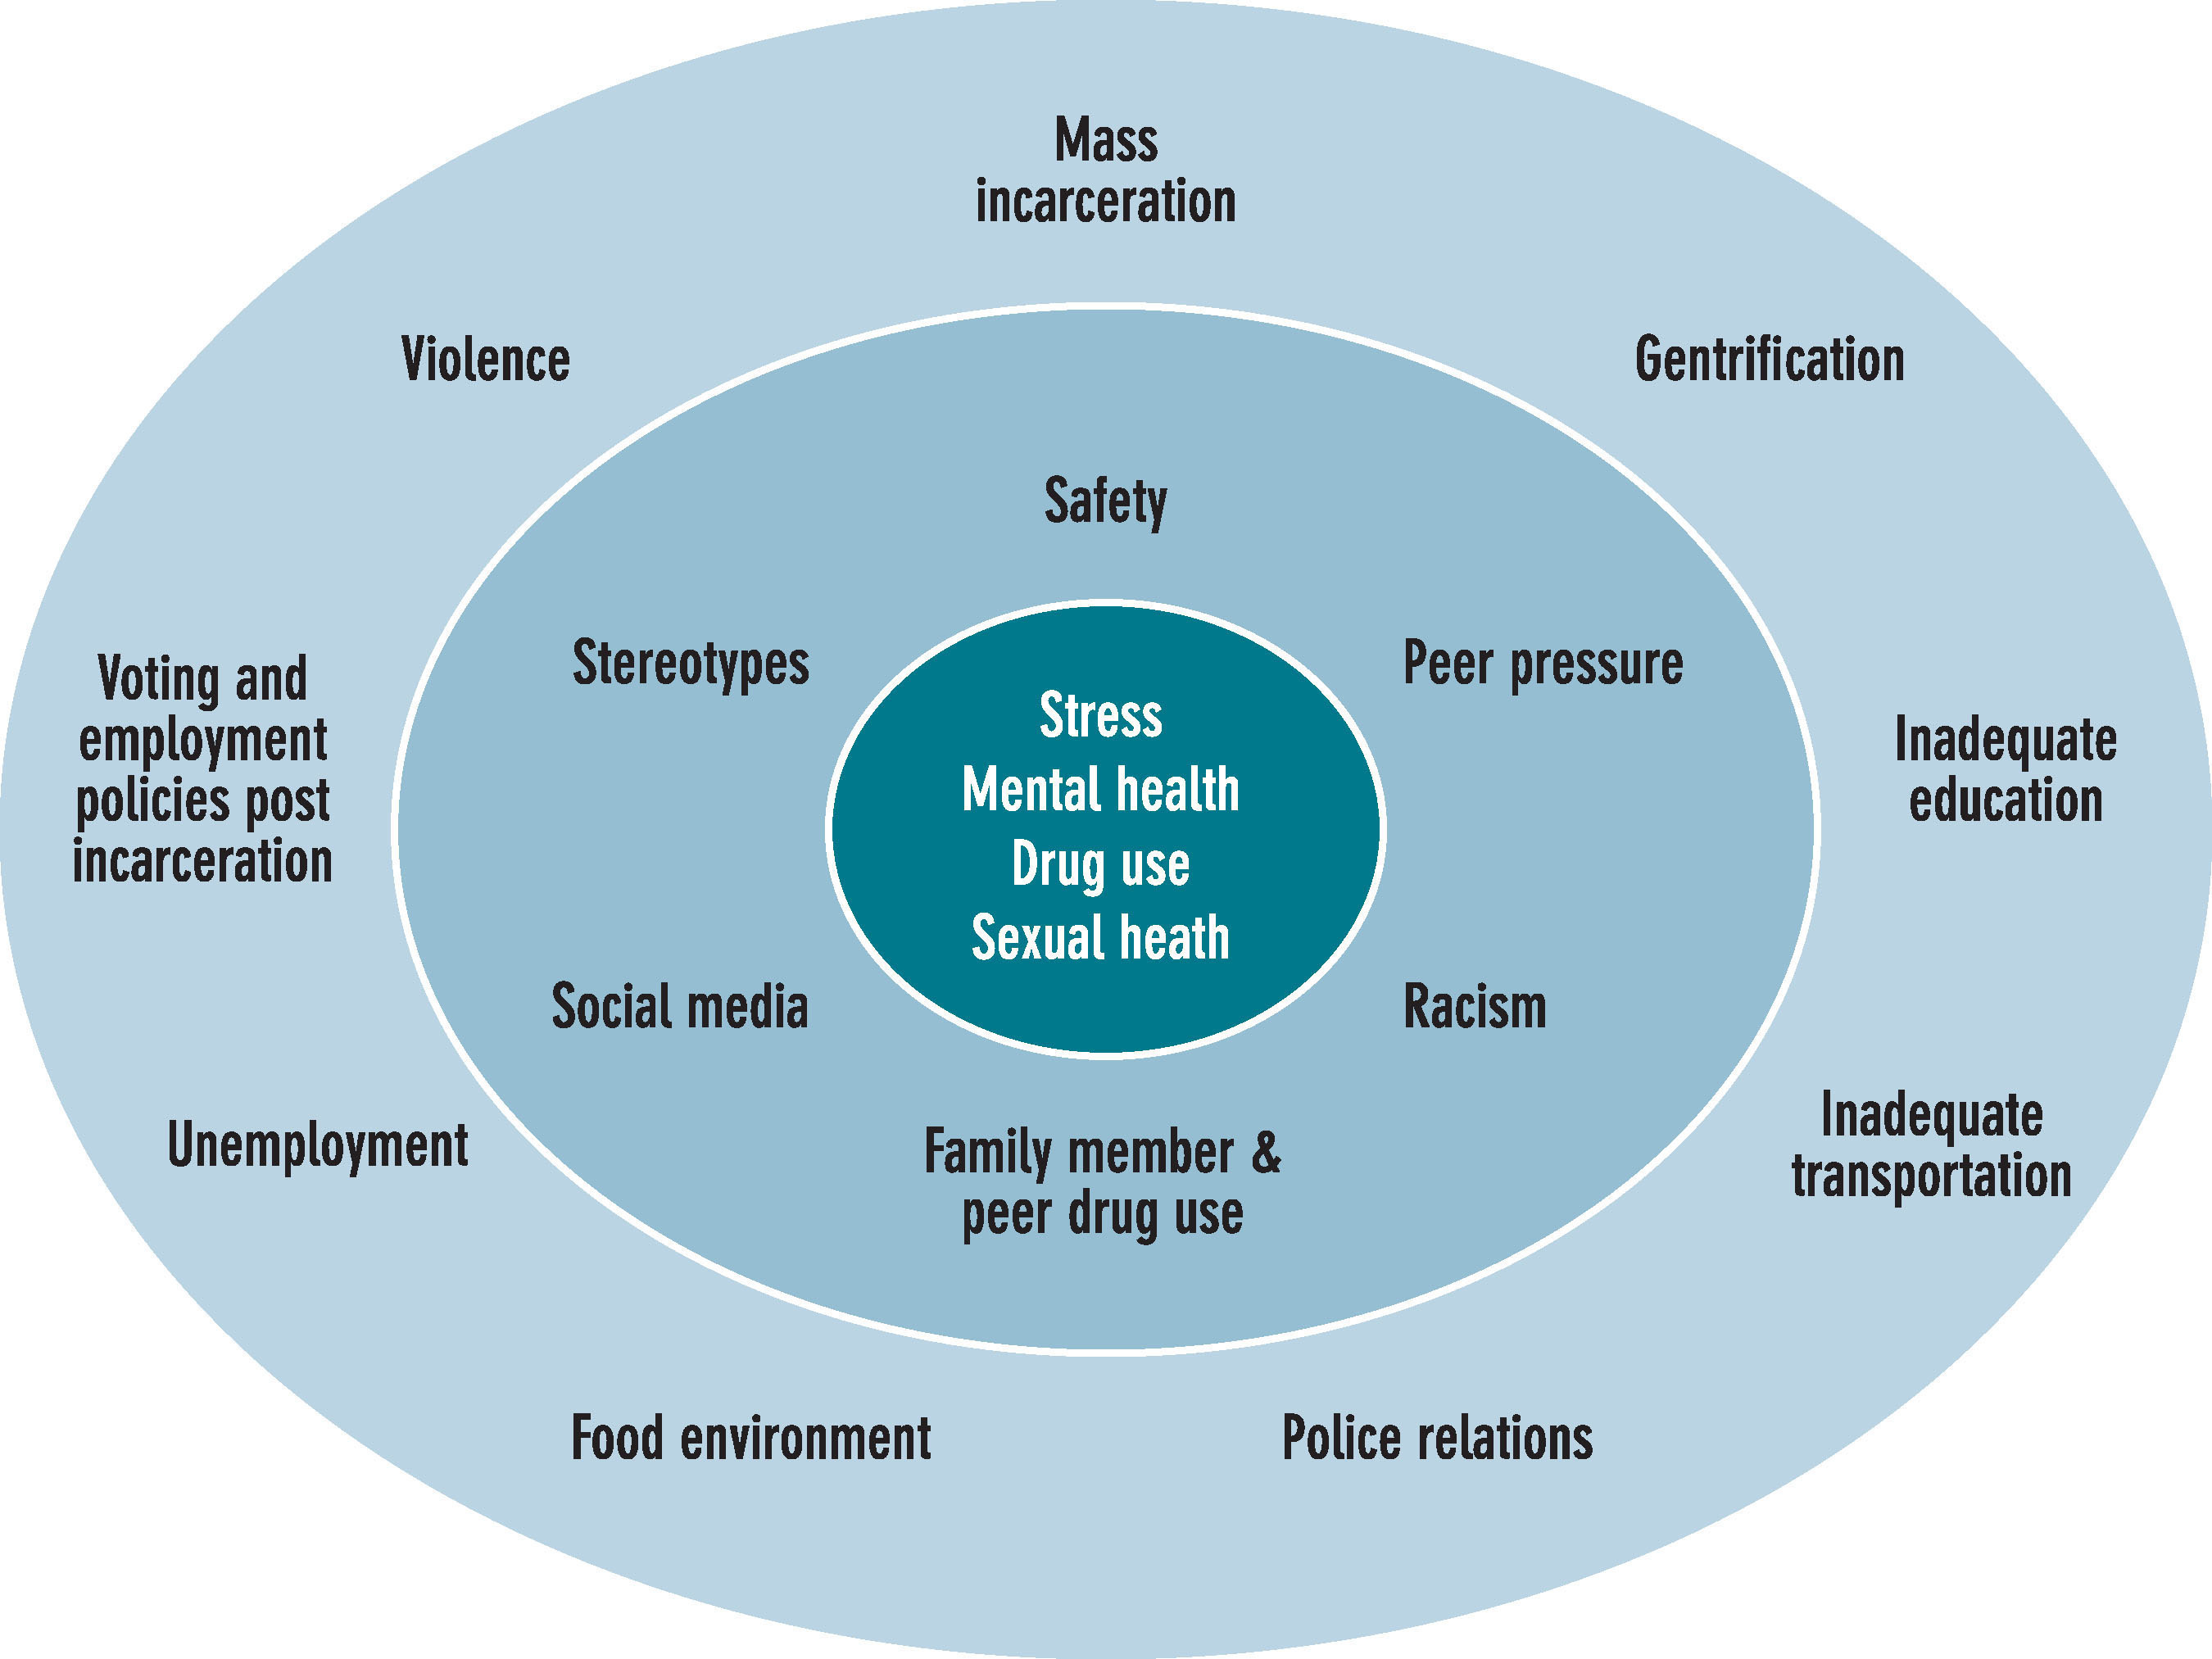 In order to design assessment protocols, youth-led research teams across the ﬁve sites brainstormed threats to health as experienced by youth at the peer, neighborhood, and community levels. This graphic depicts these threats to a young person's health and well-being. At the center are individual health conditions and behaviors identiﬁed by the teams. The second ring focuses on peer and family, or network level threats and the outer ring includes neighborhood and broader community factors.